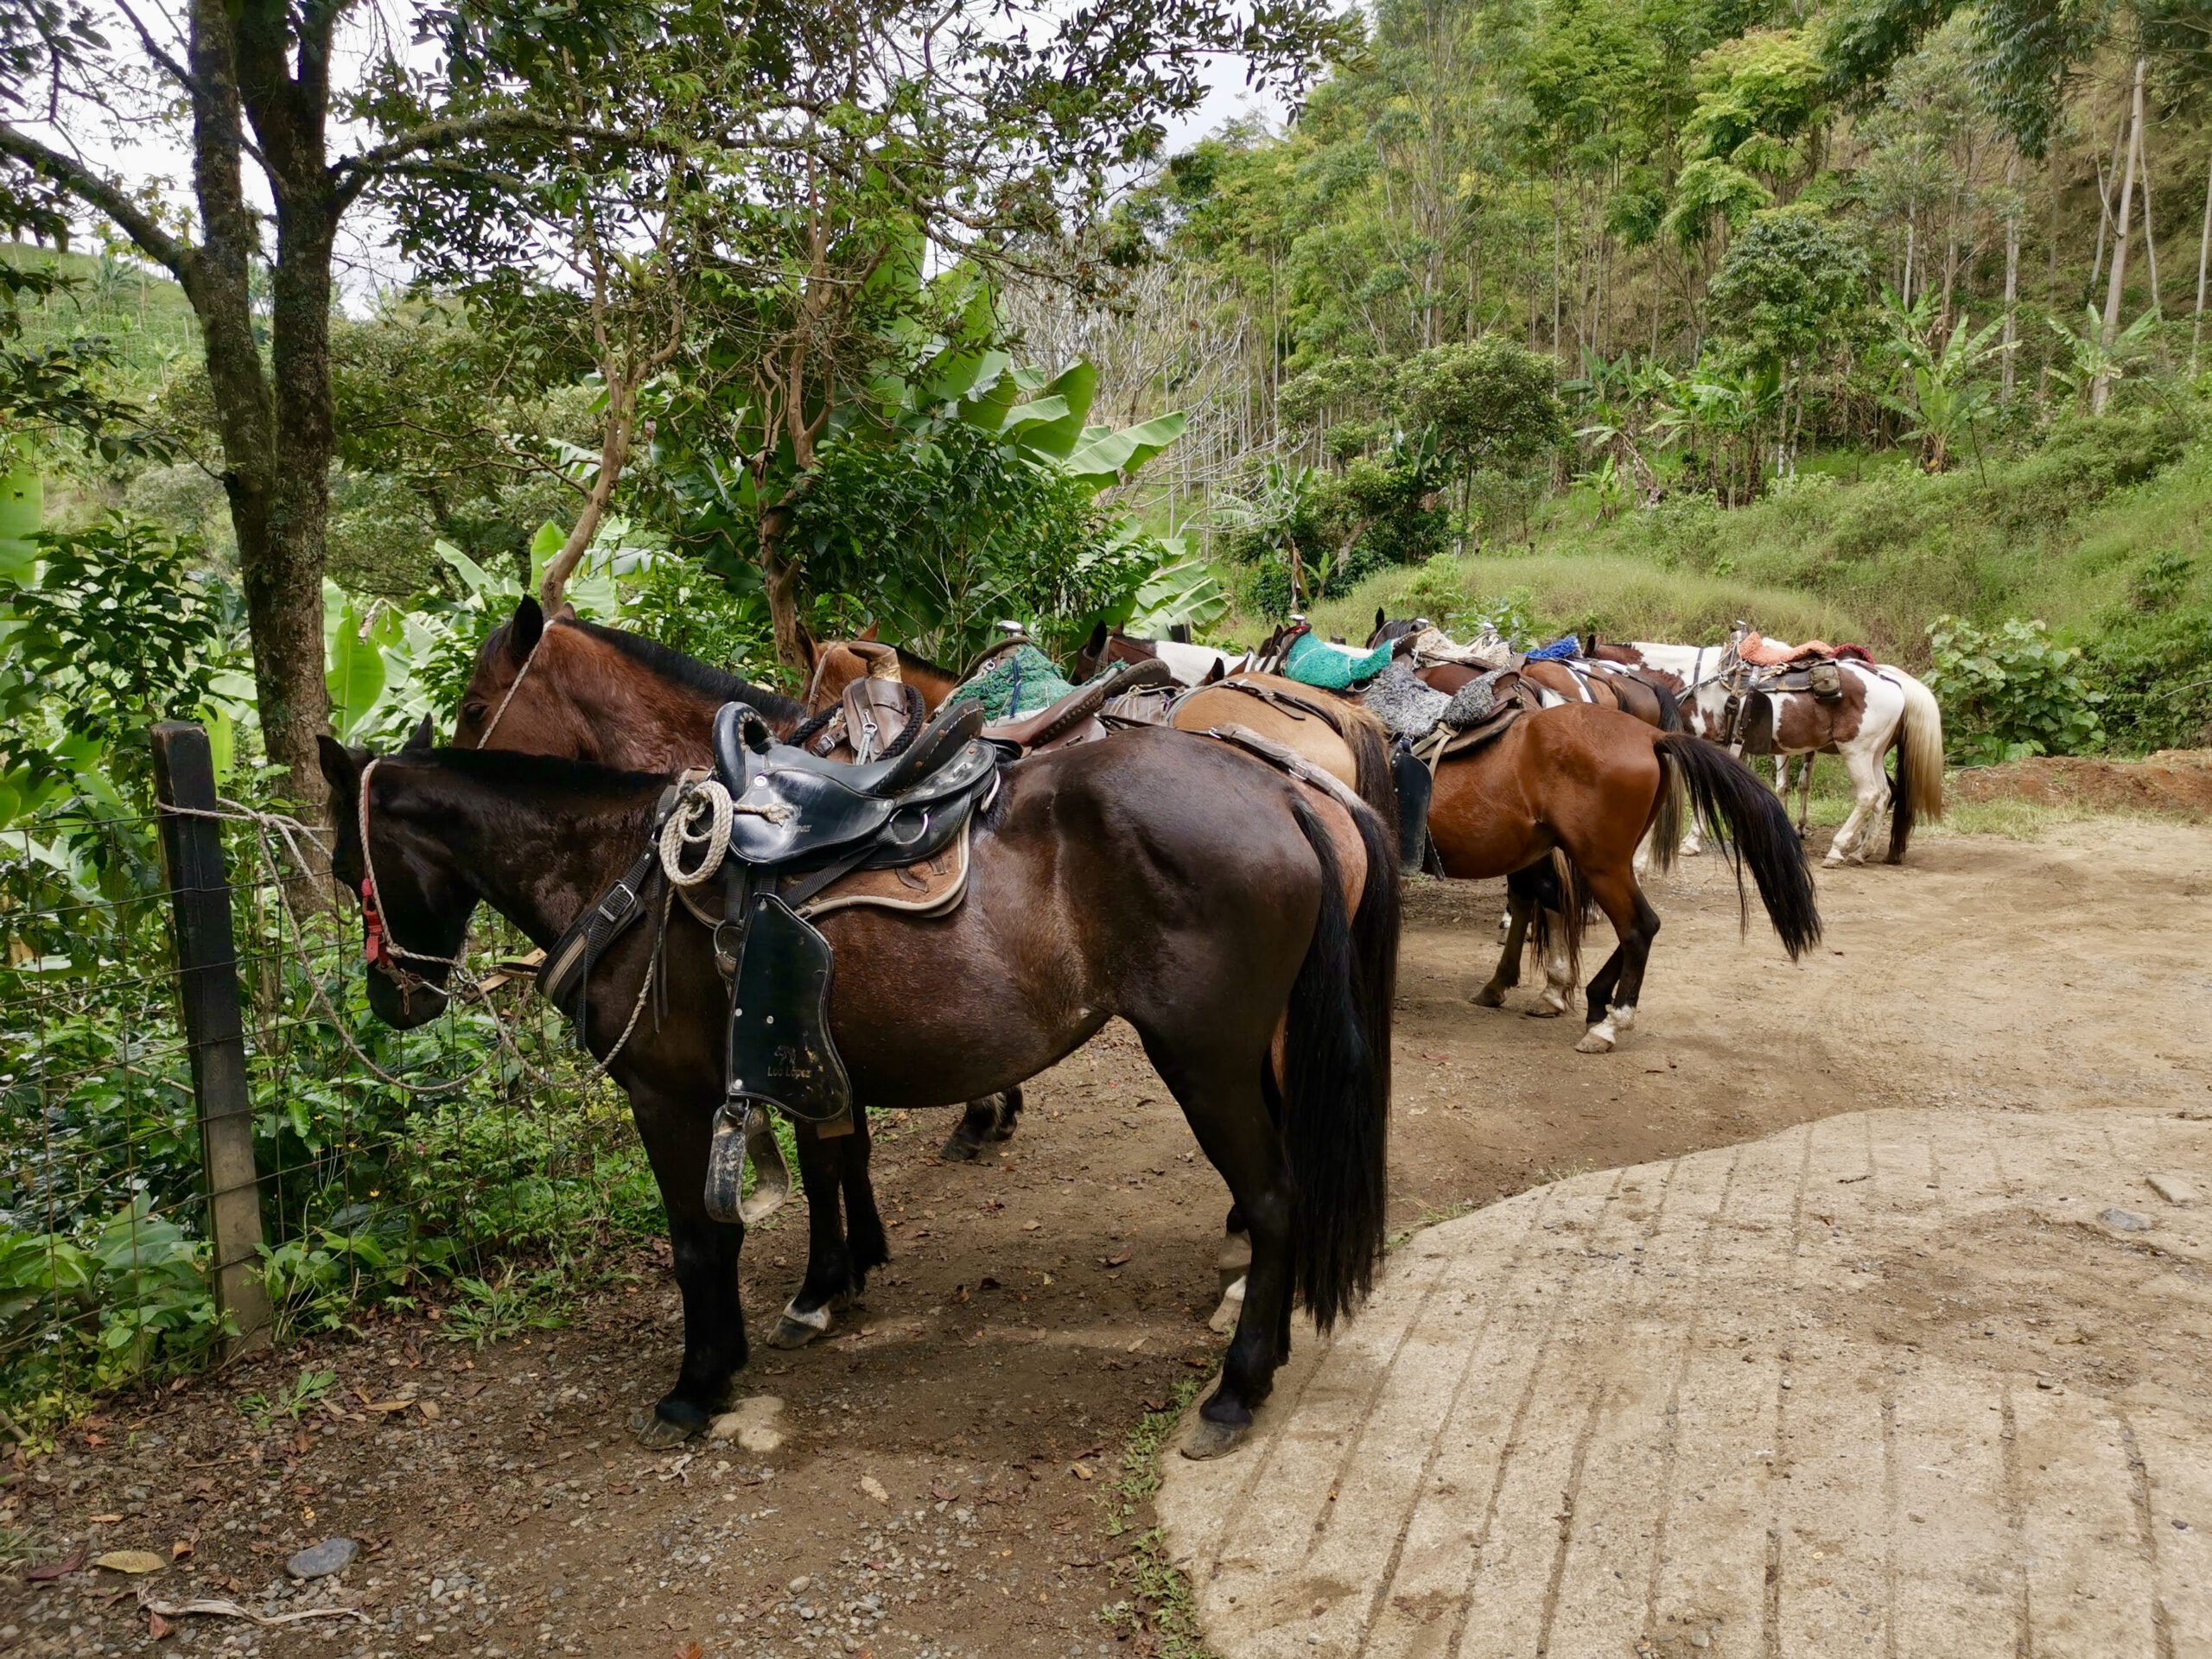 Some horses standing in a row next to a grassy field if you are asking what to do in Jardin Colombia then you can go horseriding